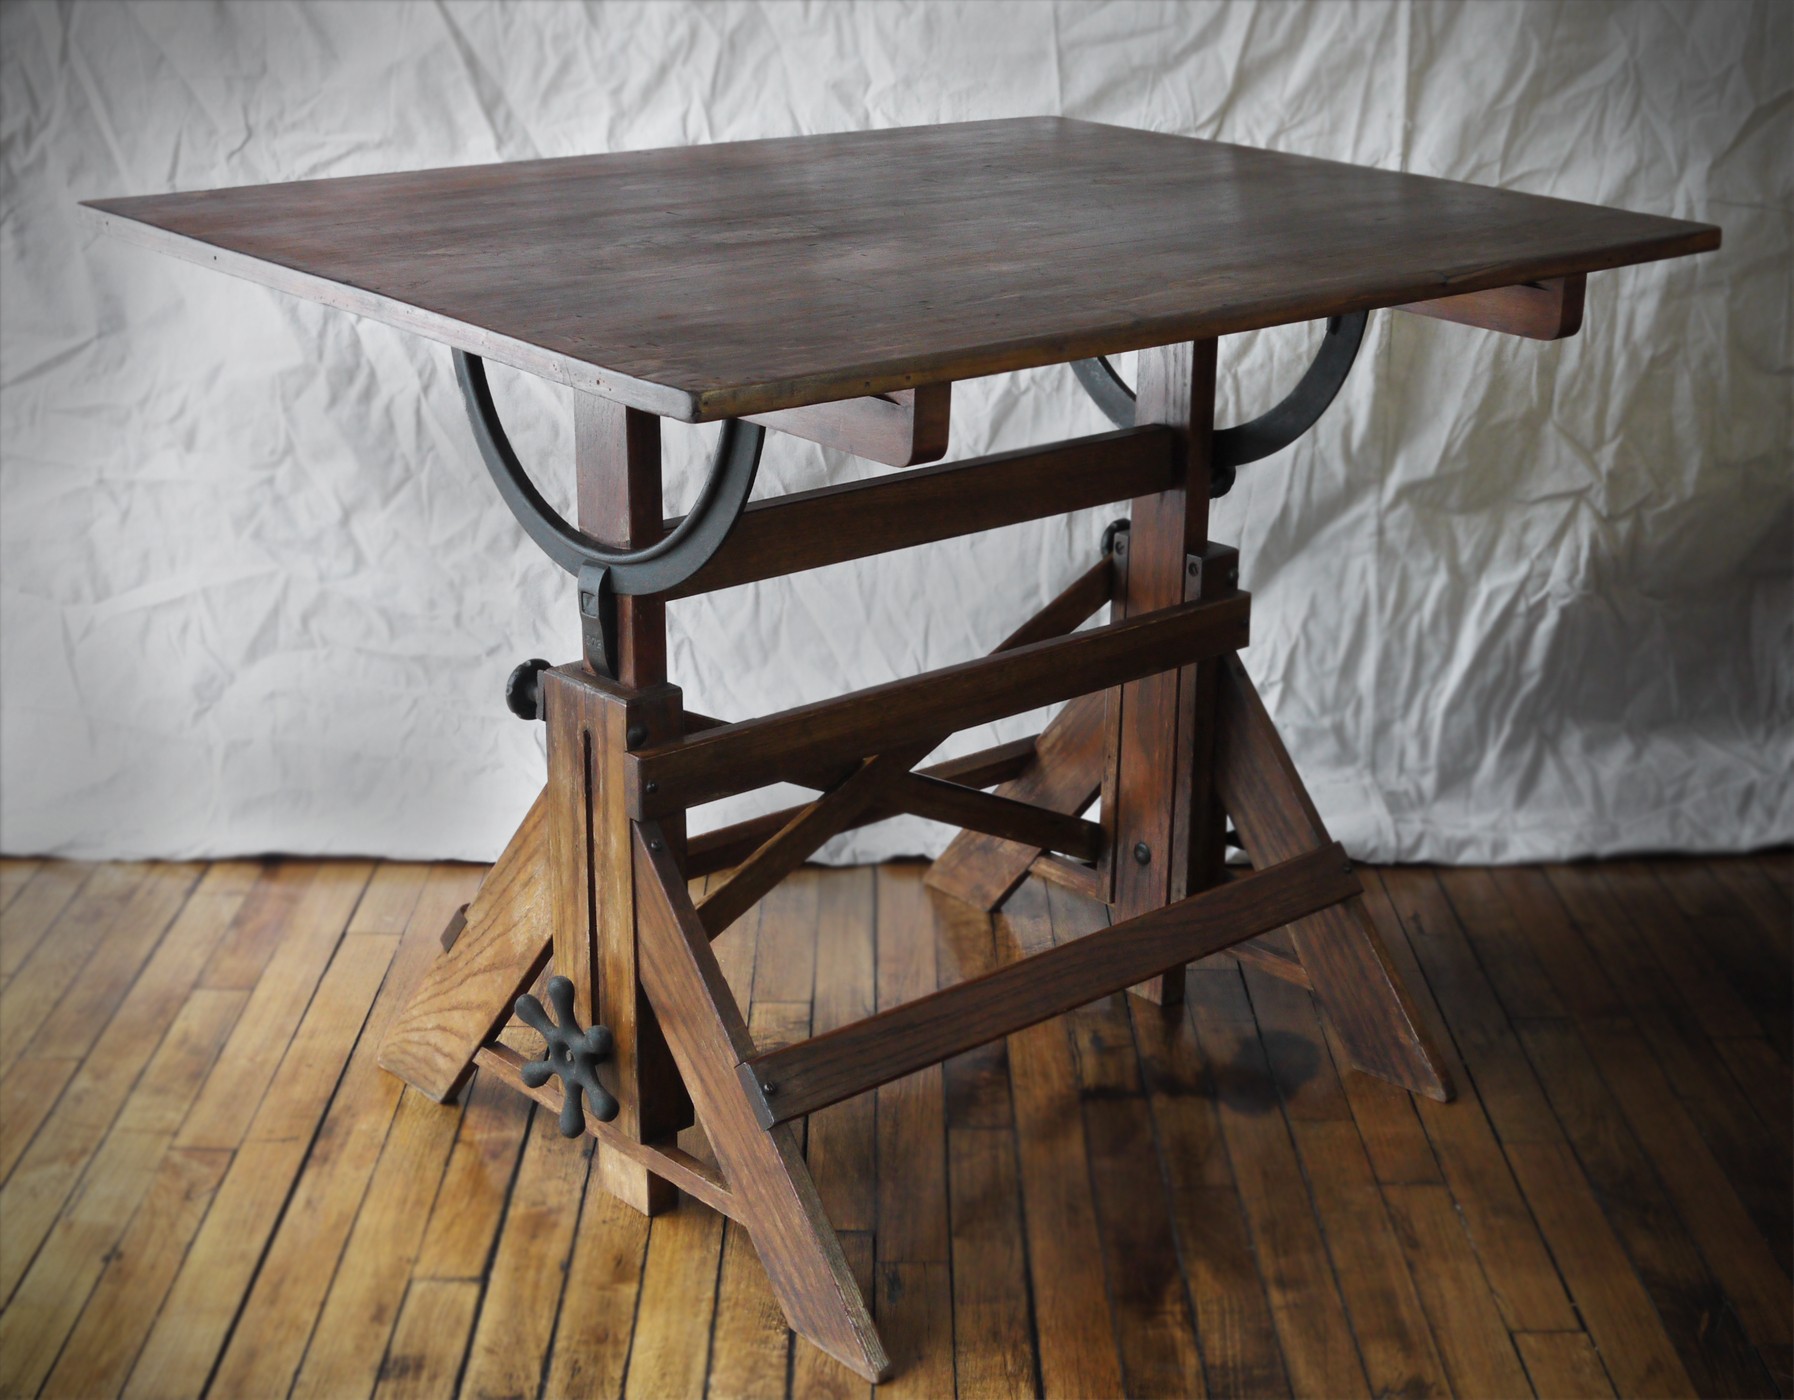 Antique Drafting Tables Ideas on Foter